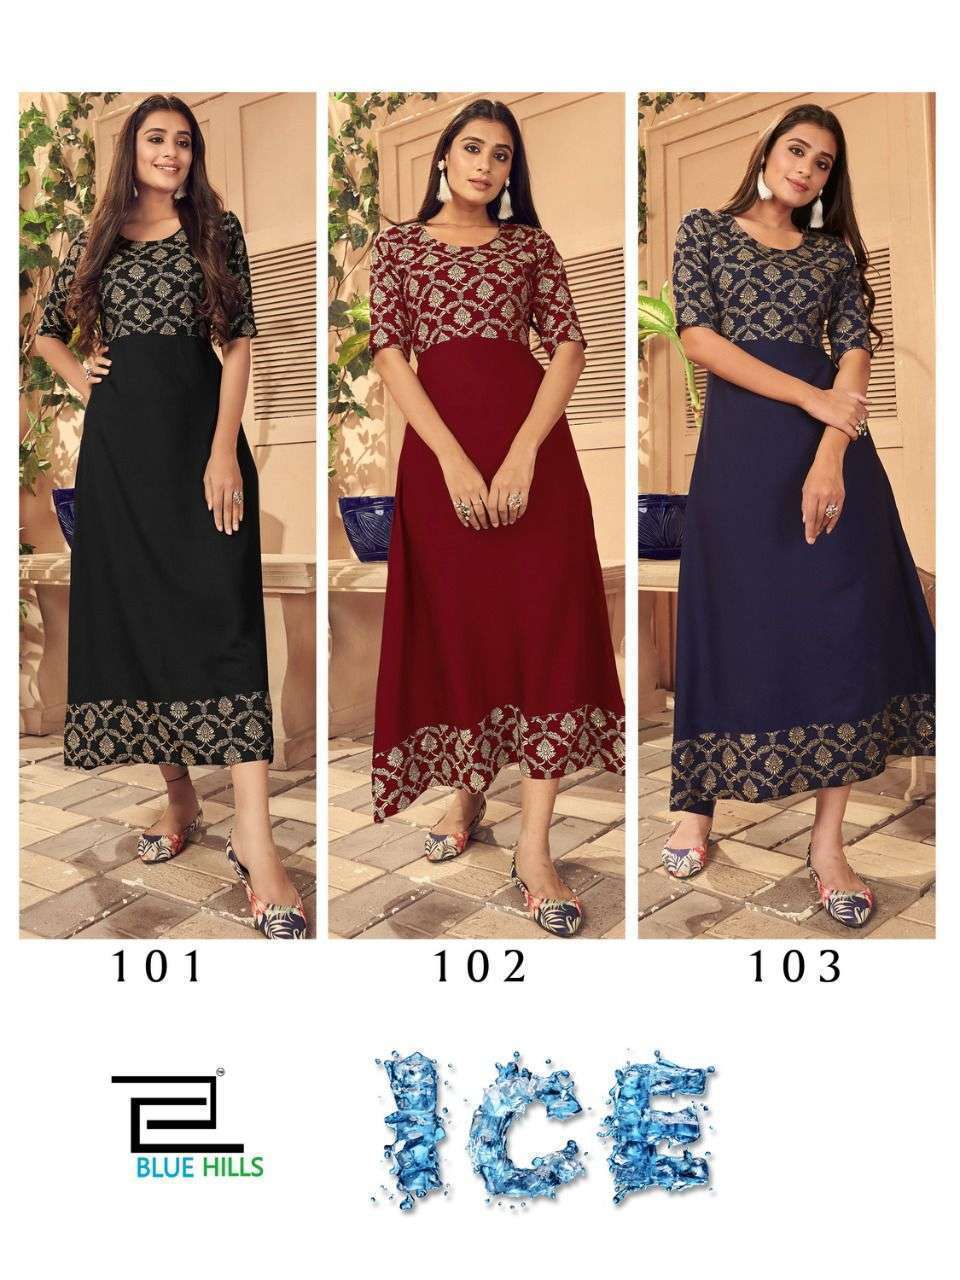 BLUE HILLS PRESENTS ICE RAYON PRINT WHOLESALE LONG GOWN